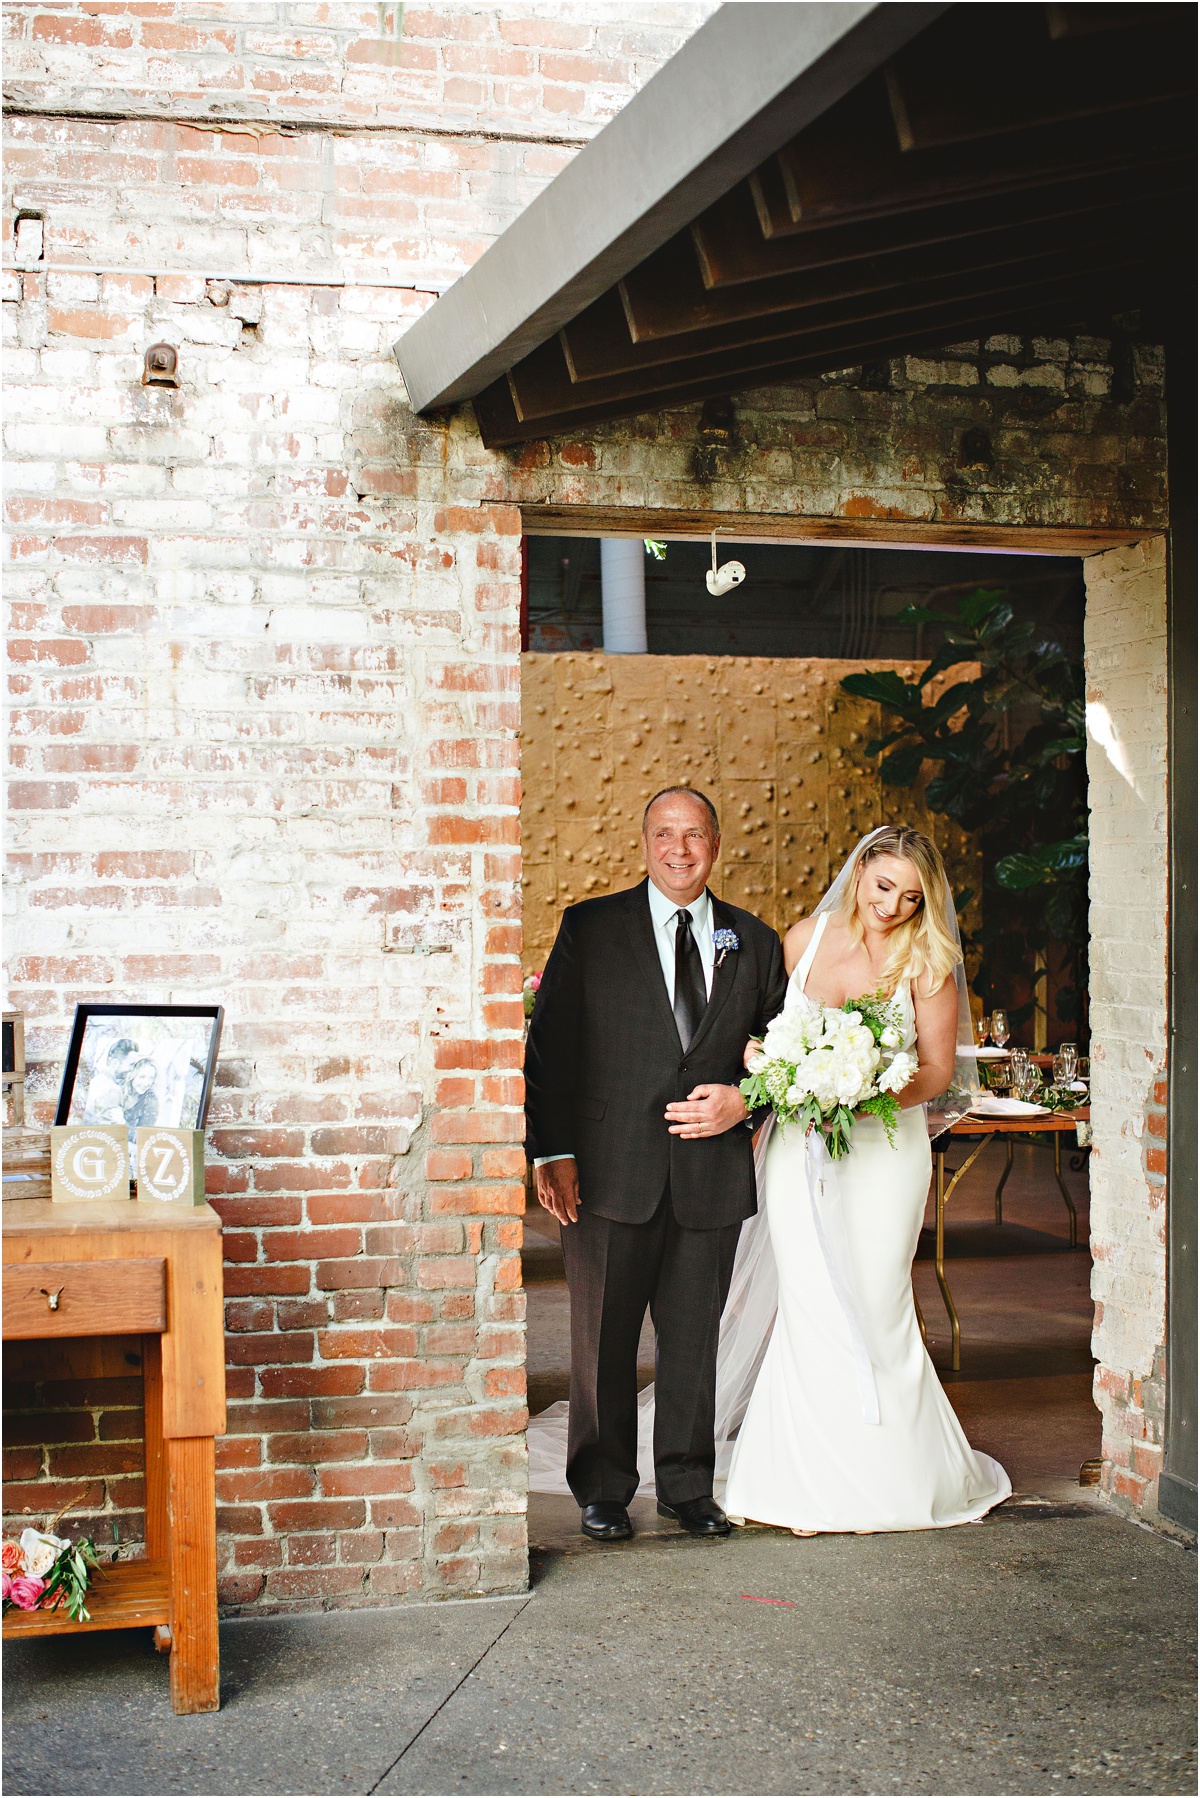 Bride and Father of the Bride | Stacee Lianna Photography